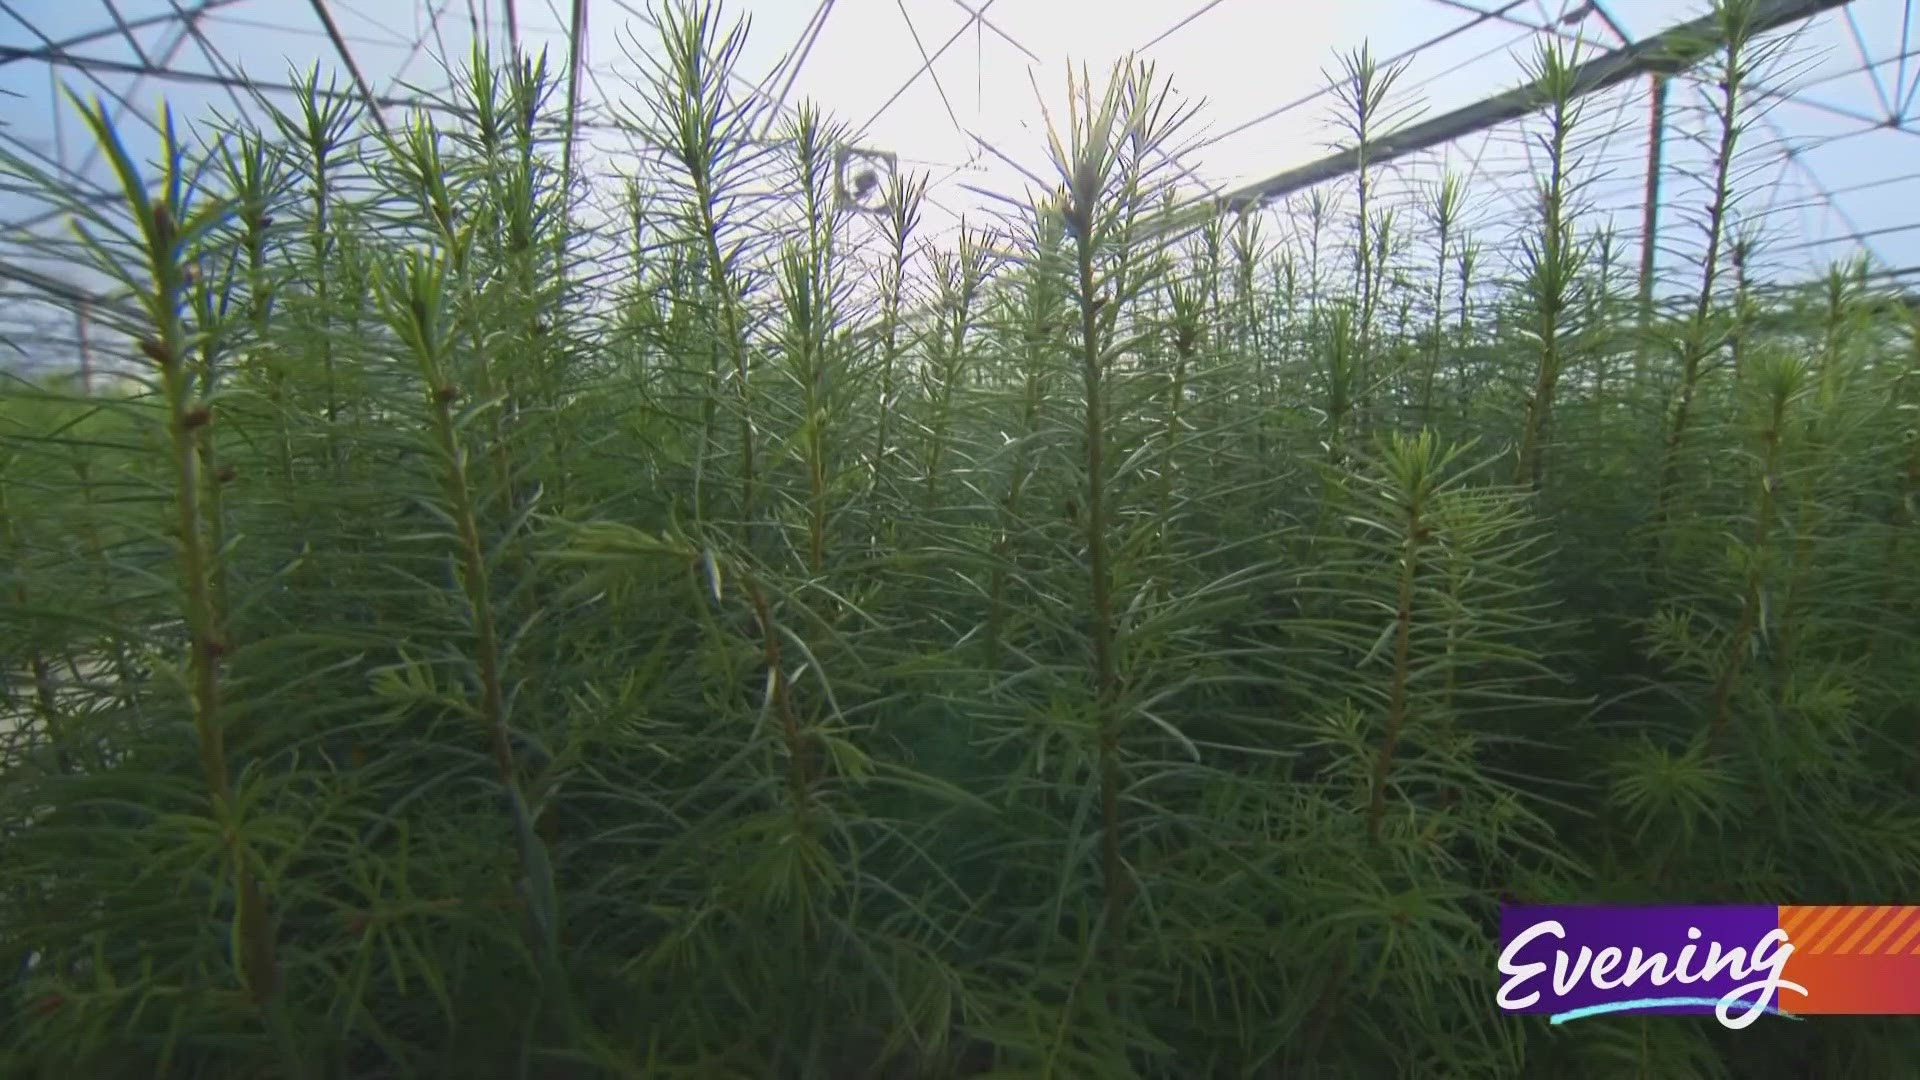 This Weyerhaeuser tree nursery also grows future forests from seed. #k5evening